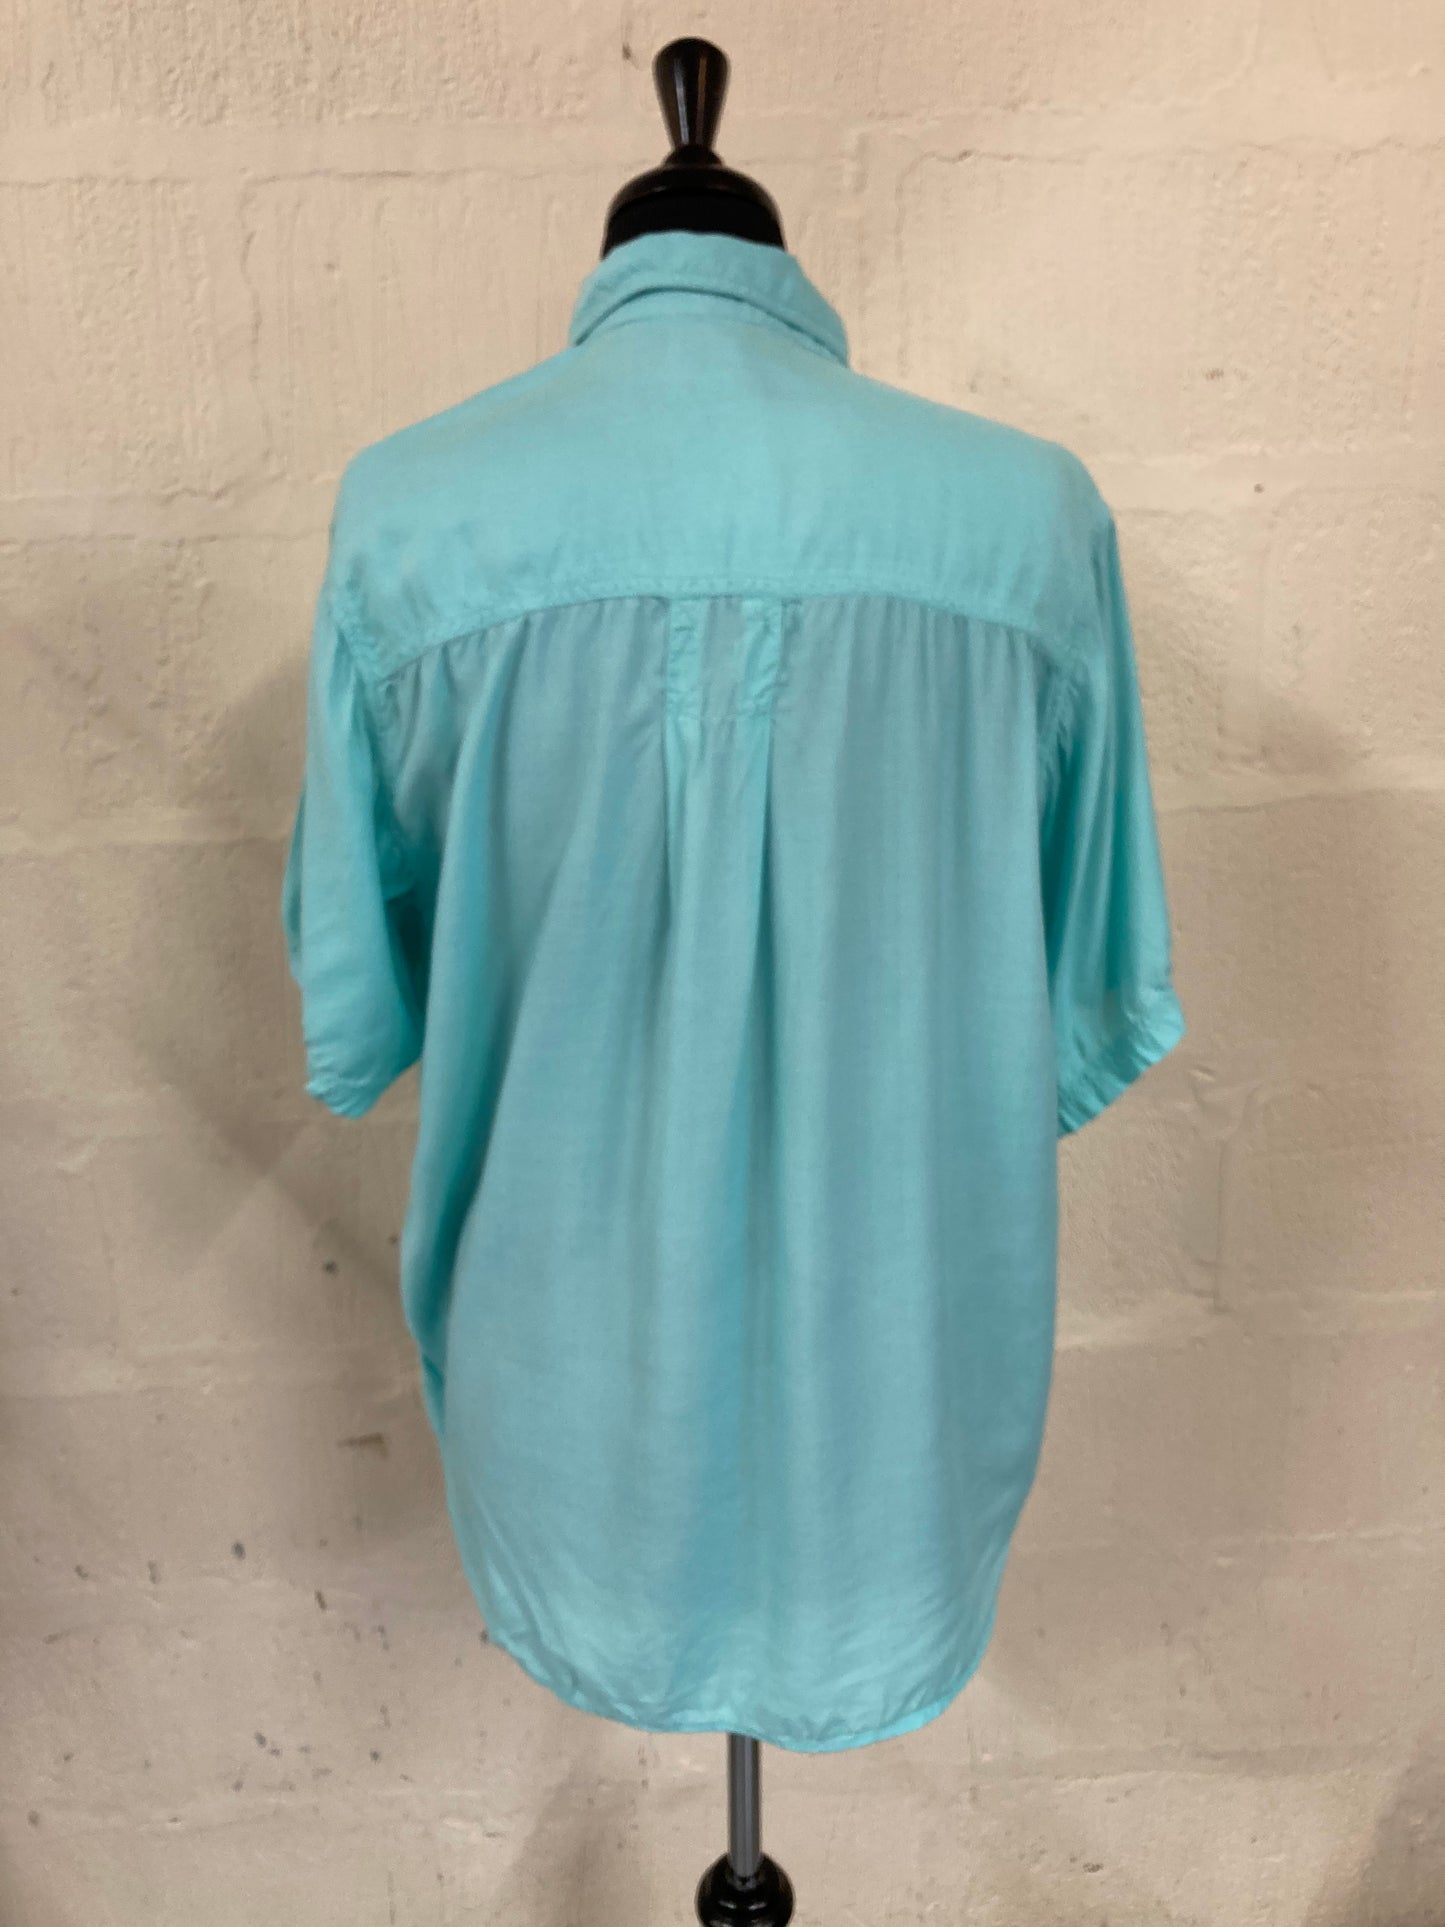 1980s Short Sleeve Turquoise Embroidered Shirt Size 12